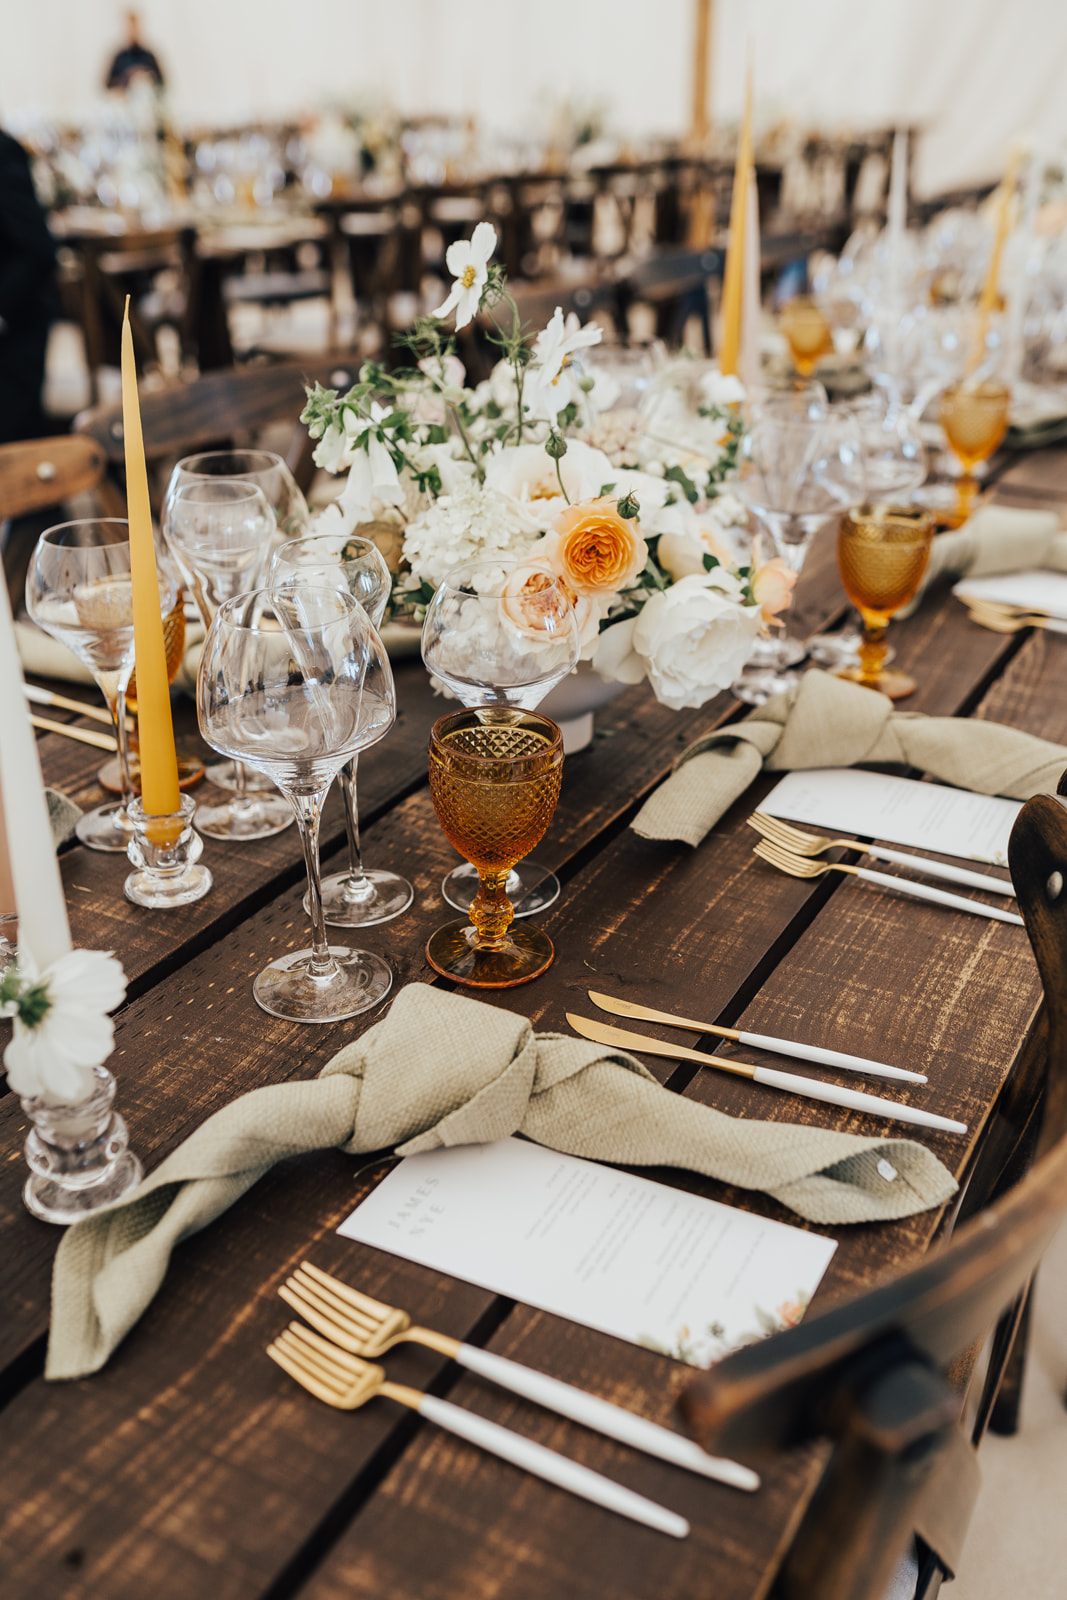 Lora & Daves Garden Sperry Tent Wedding: Images by Rebecca Carpenter Photography